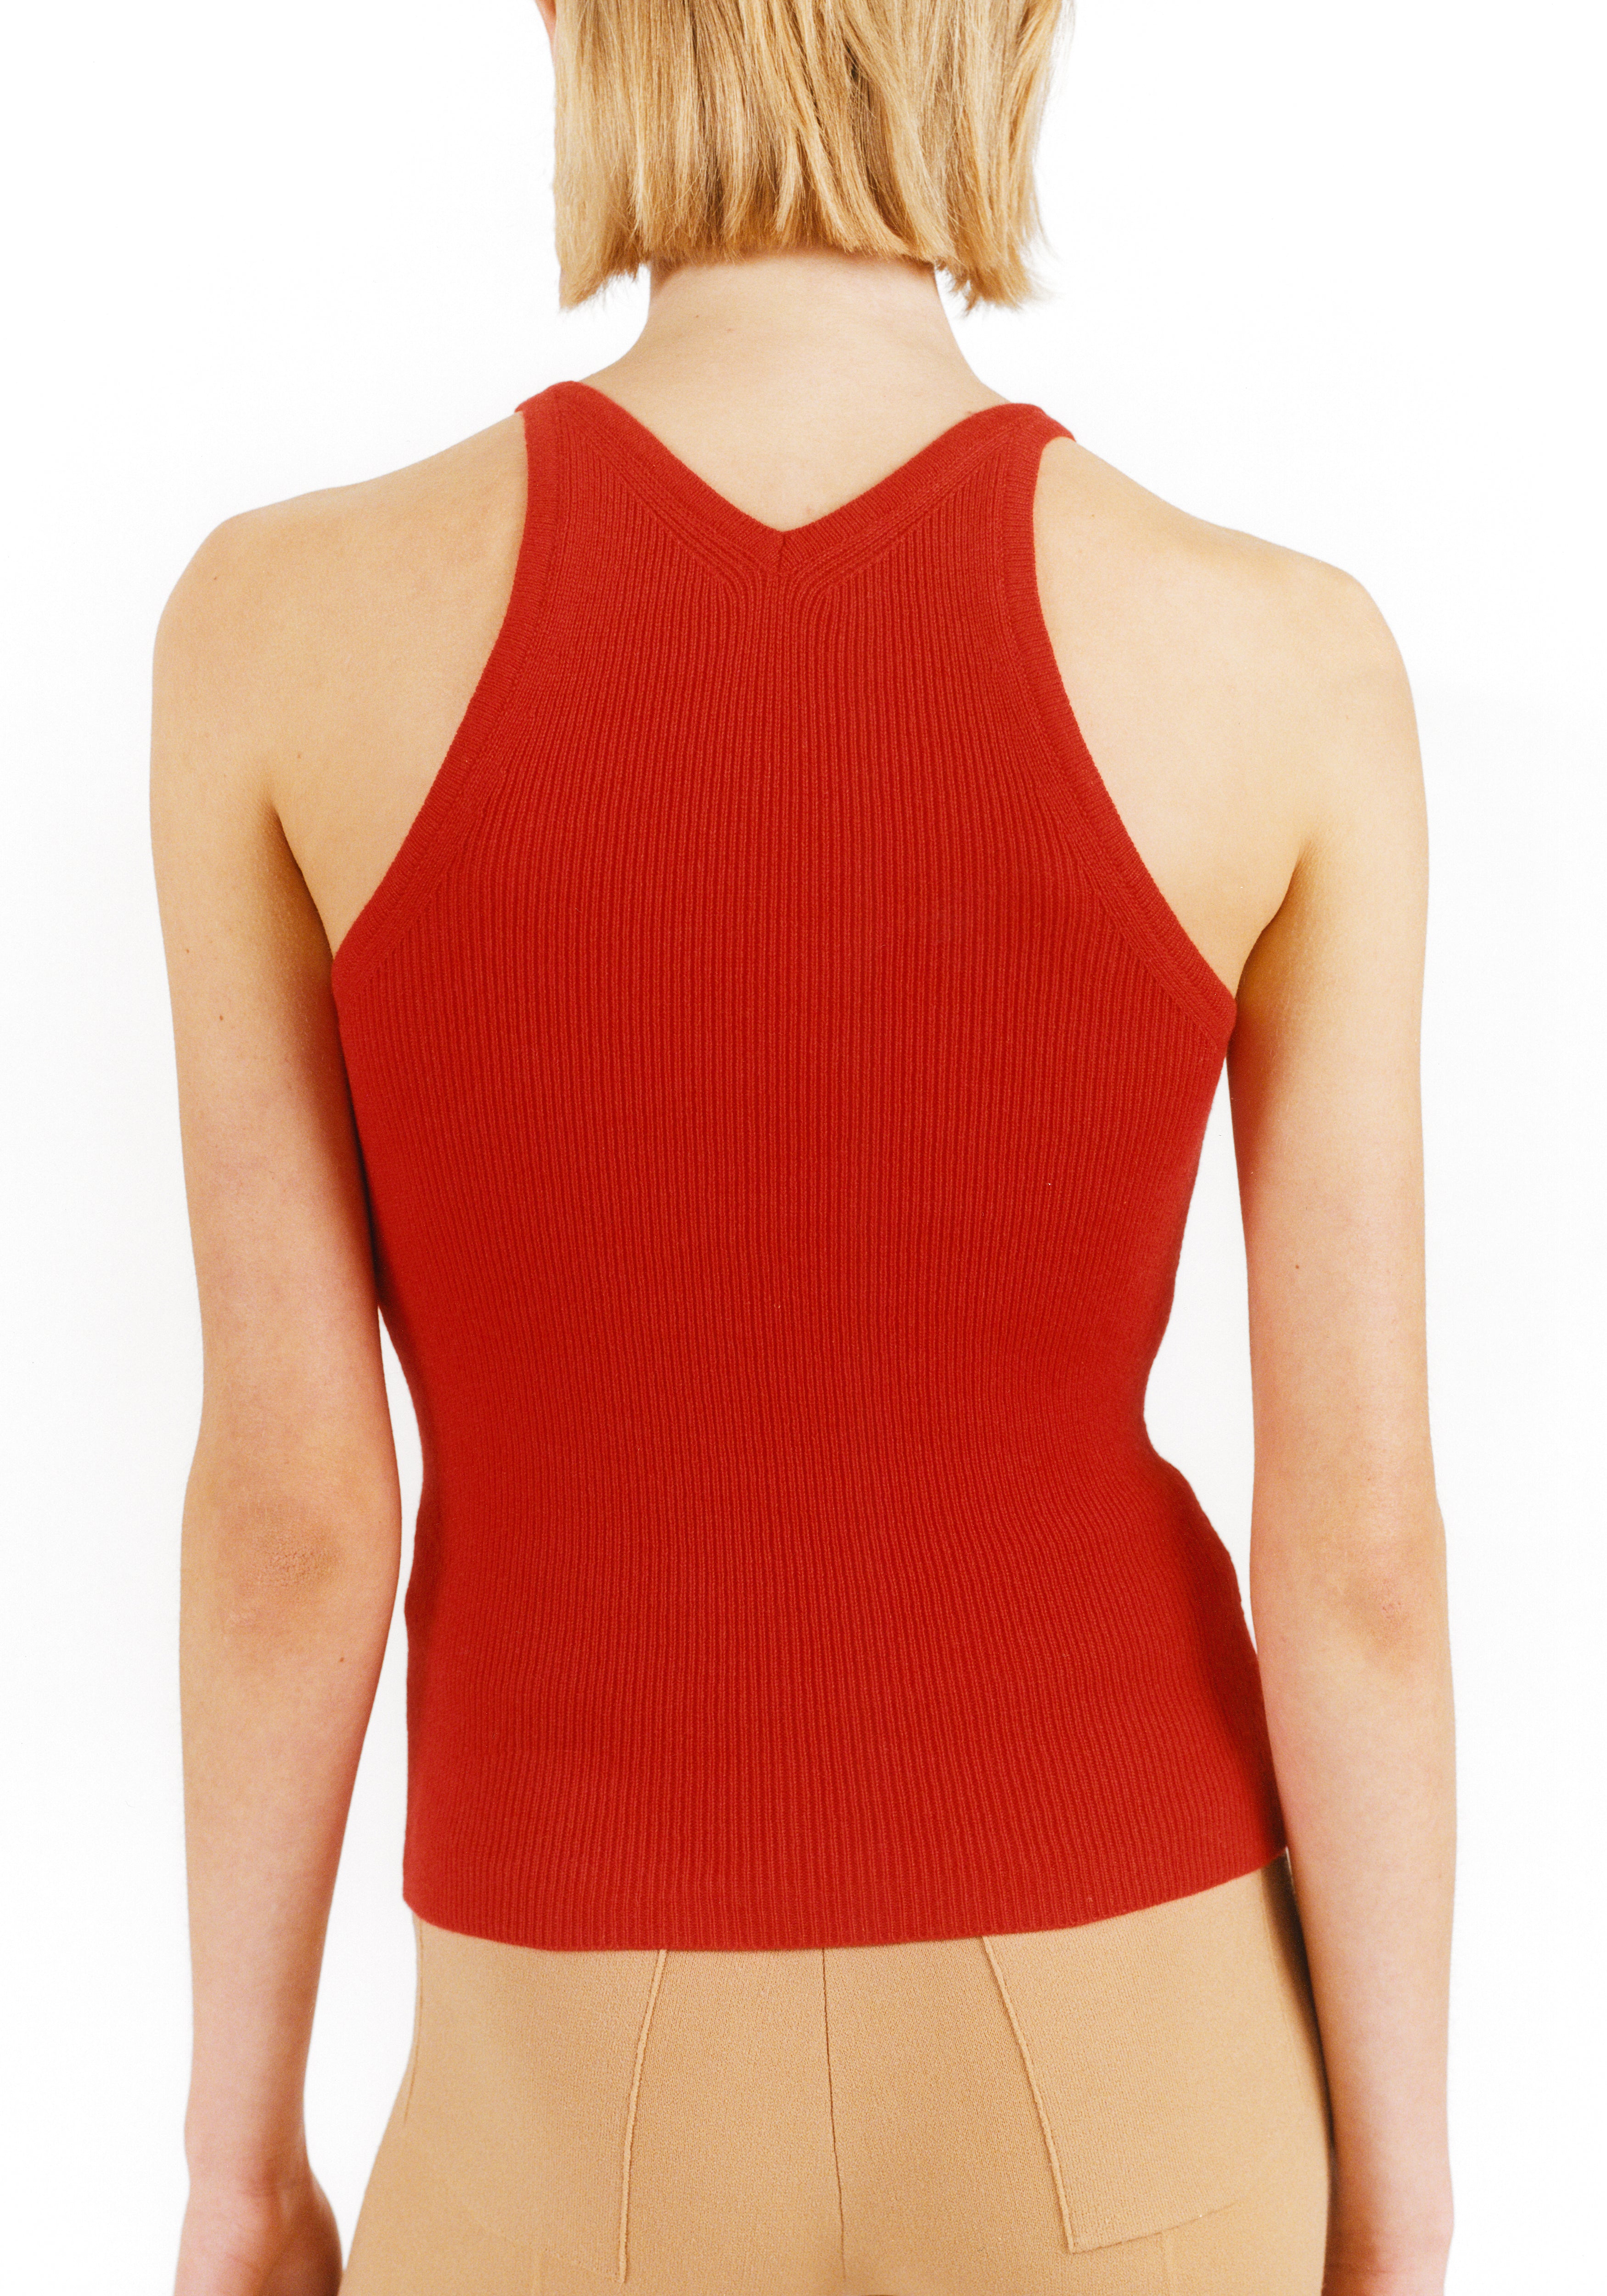 Red Luxury Tank Top Design Cashmere